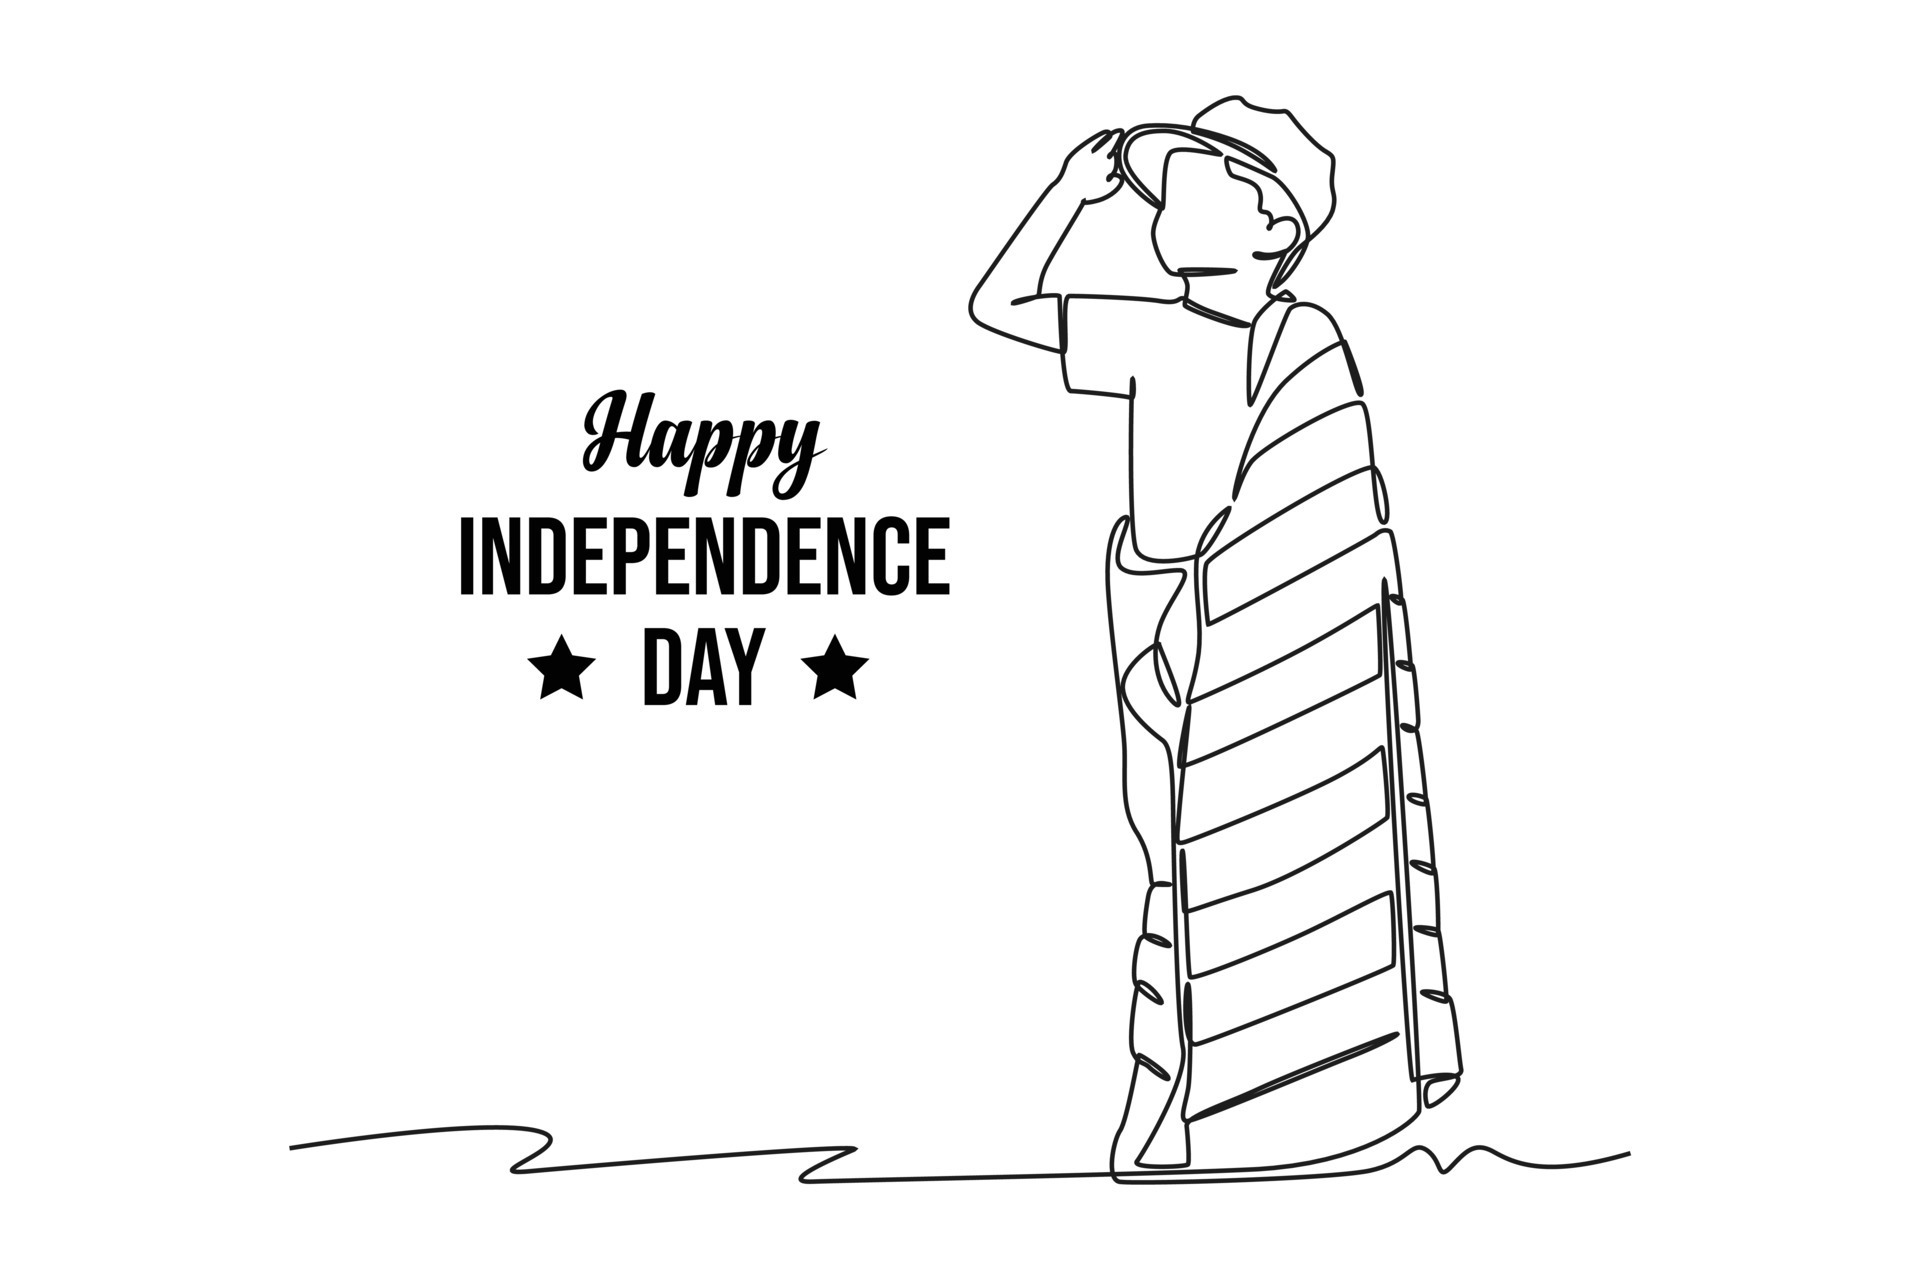 Drawings based on Independence Day – India NCC-nextbuild.com.vn